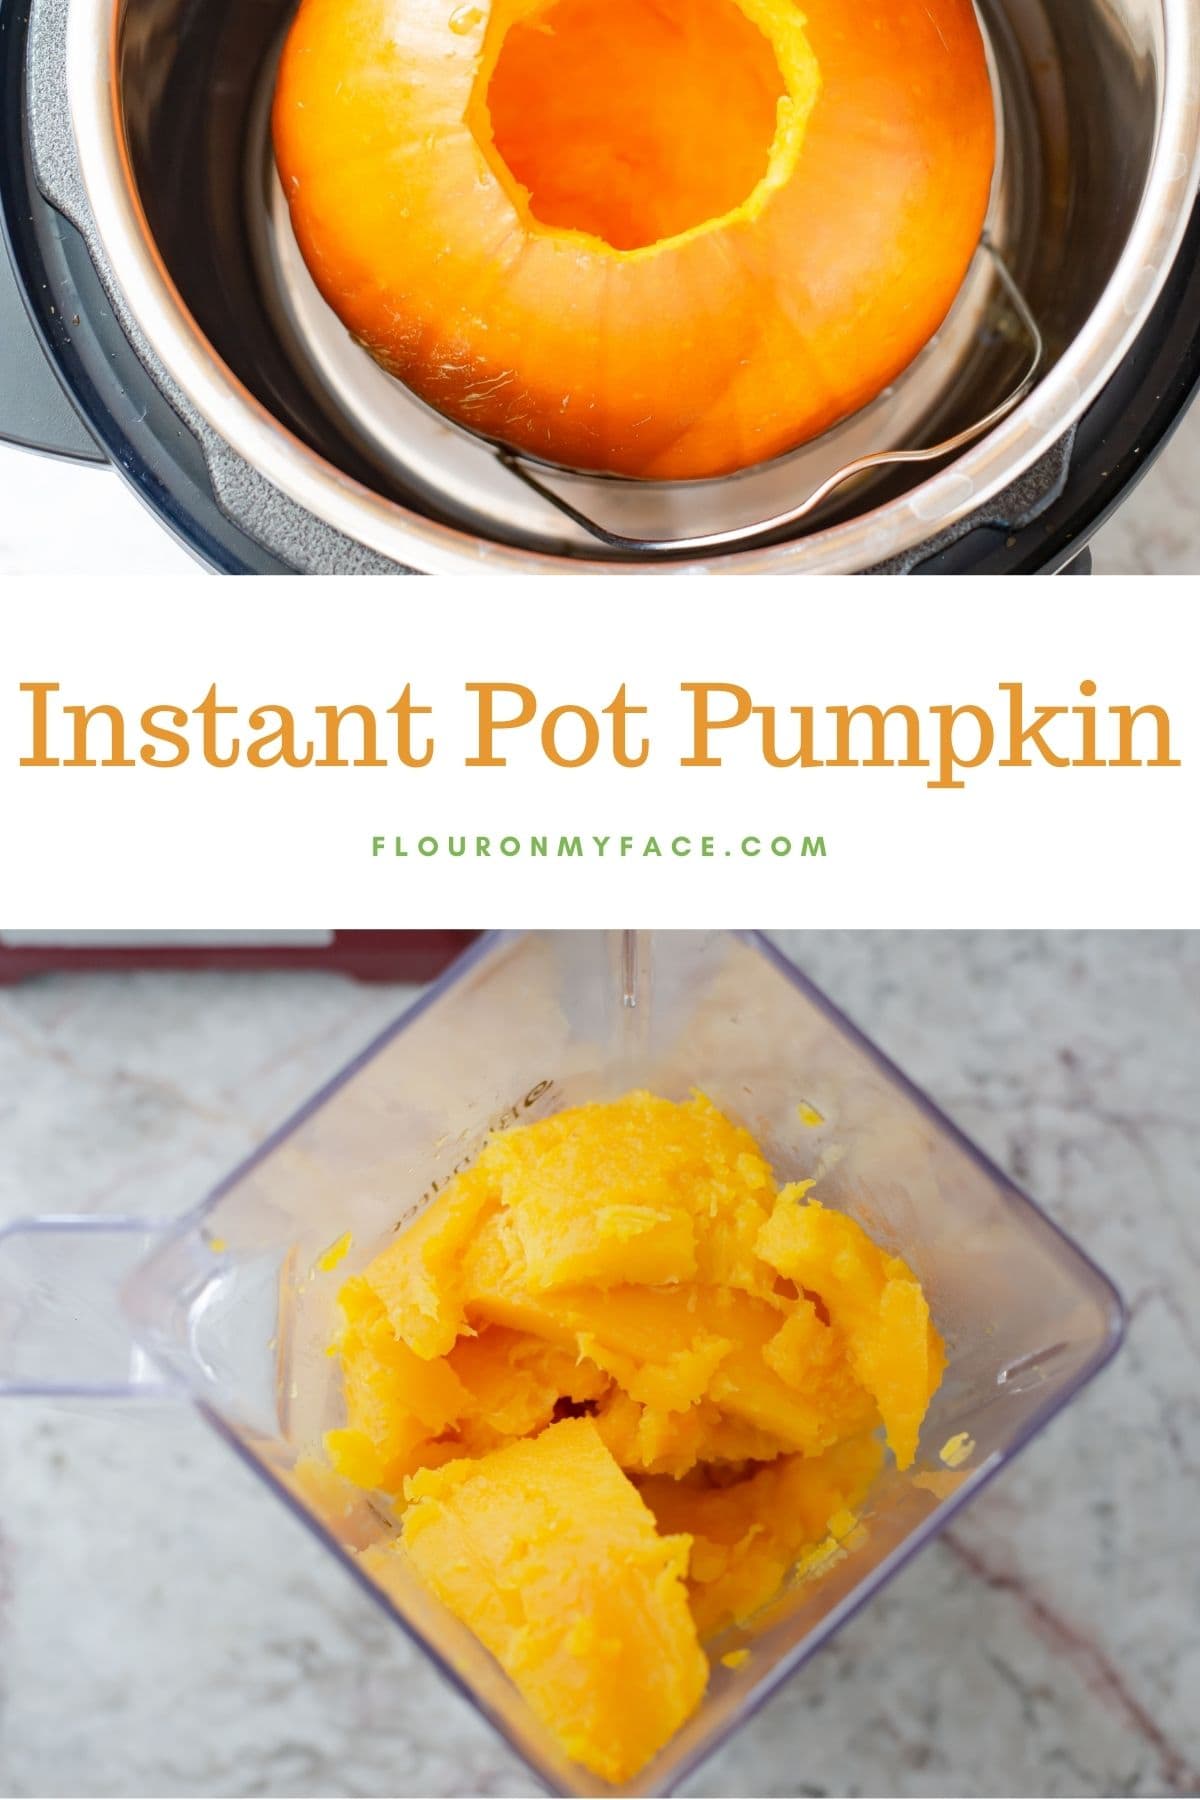 How to make Instant Pot Pumpkin in the electric pressure cooker.